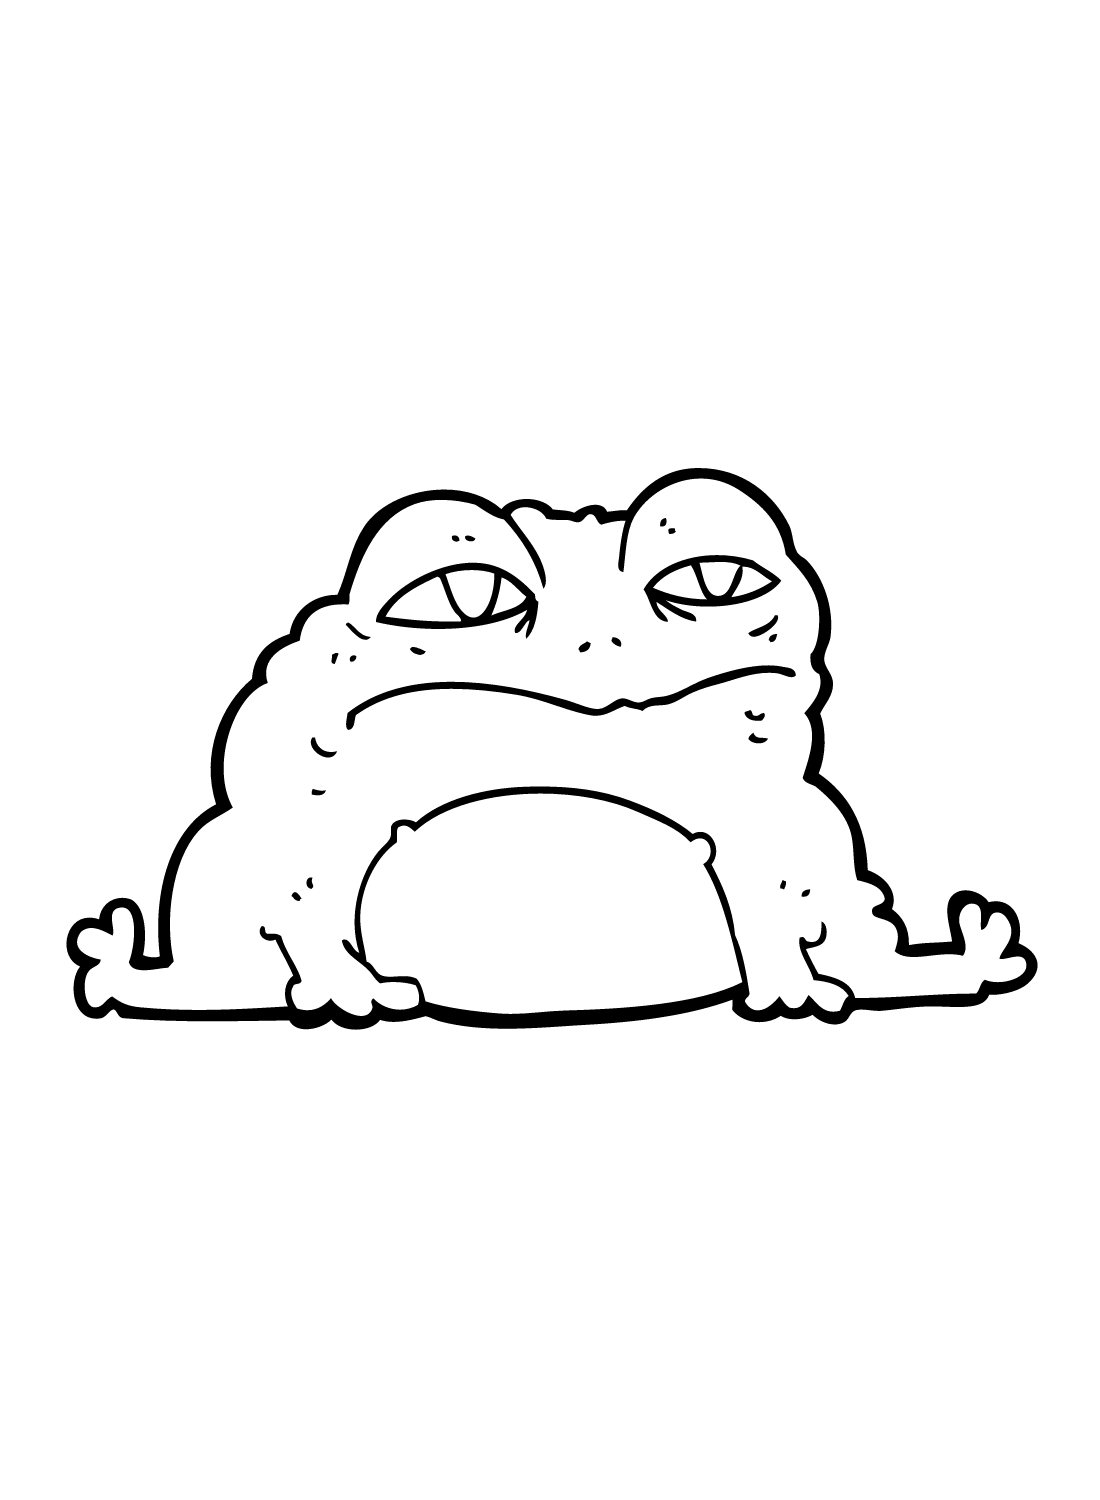 Cute Toad Coloring Page - Free Printable Coloring Pages